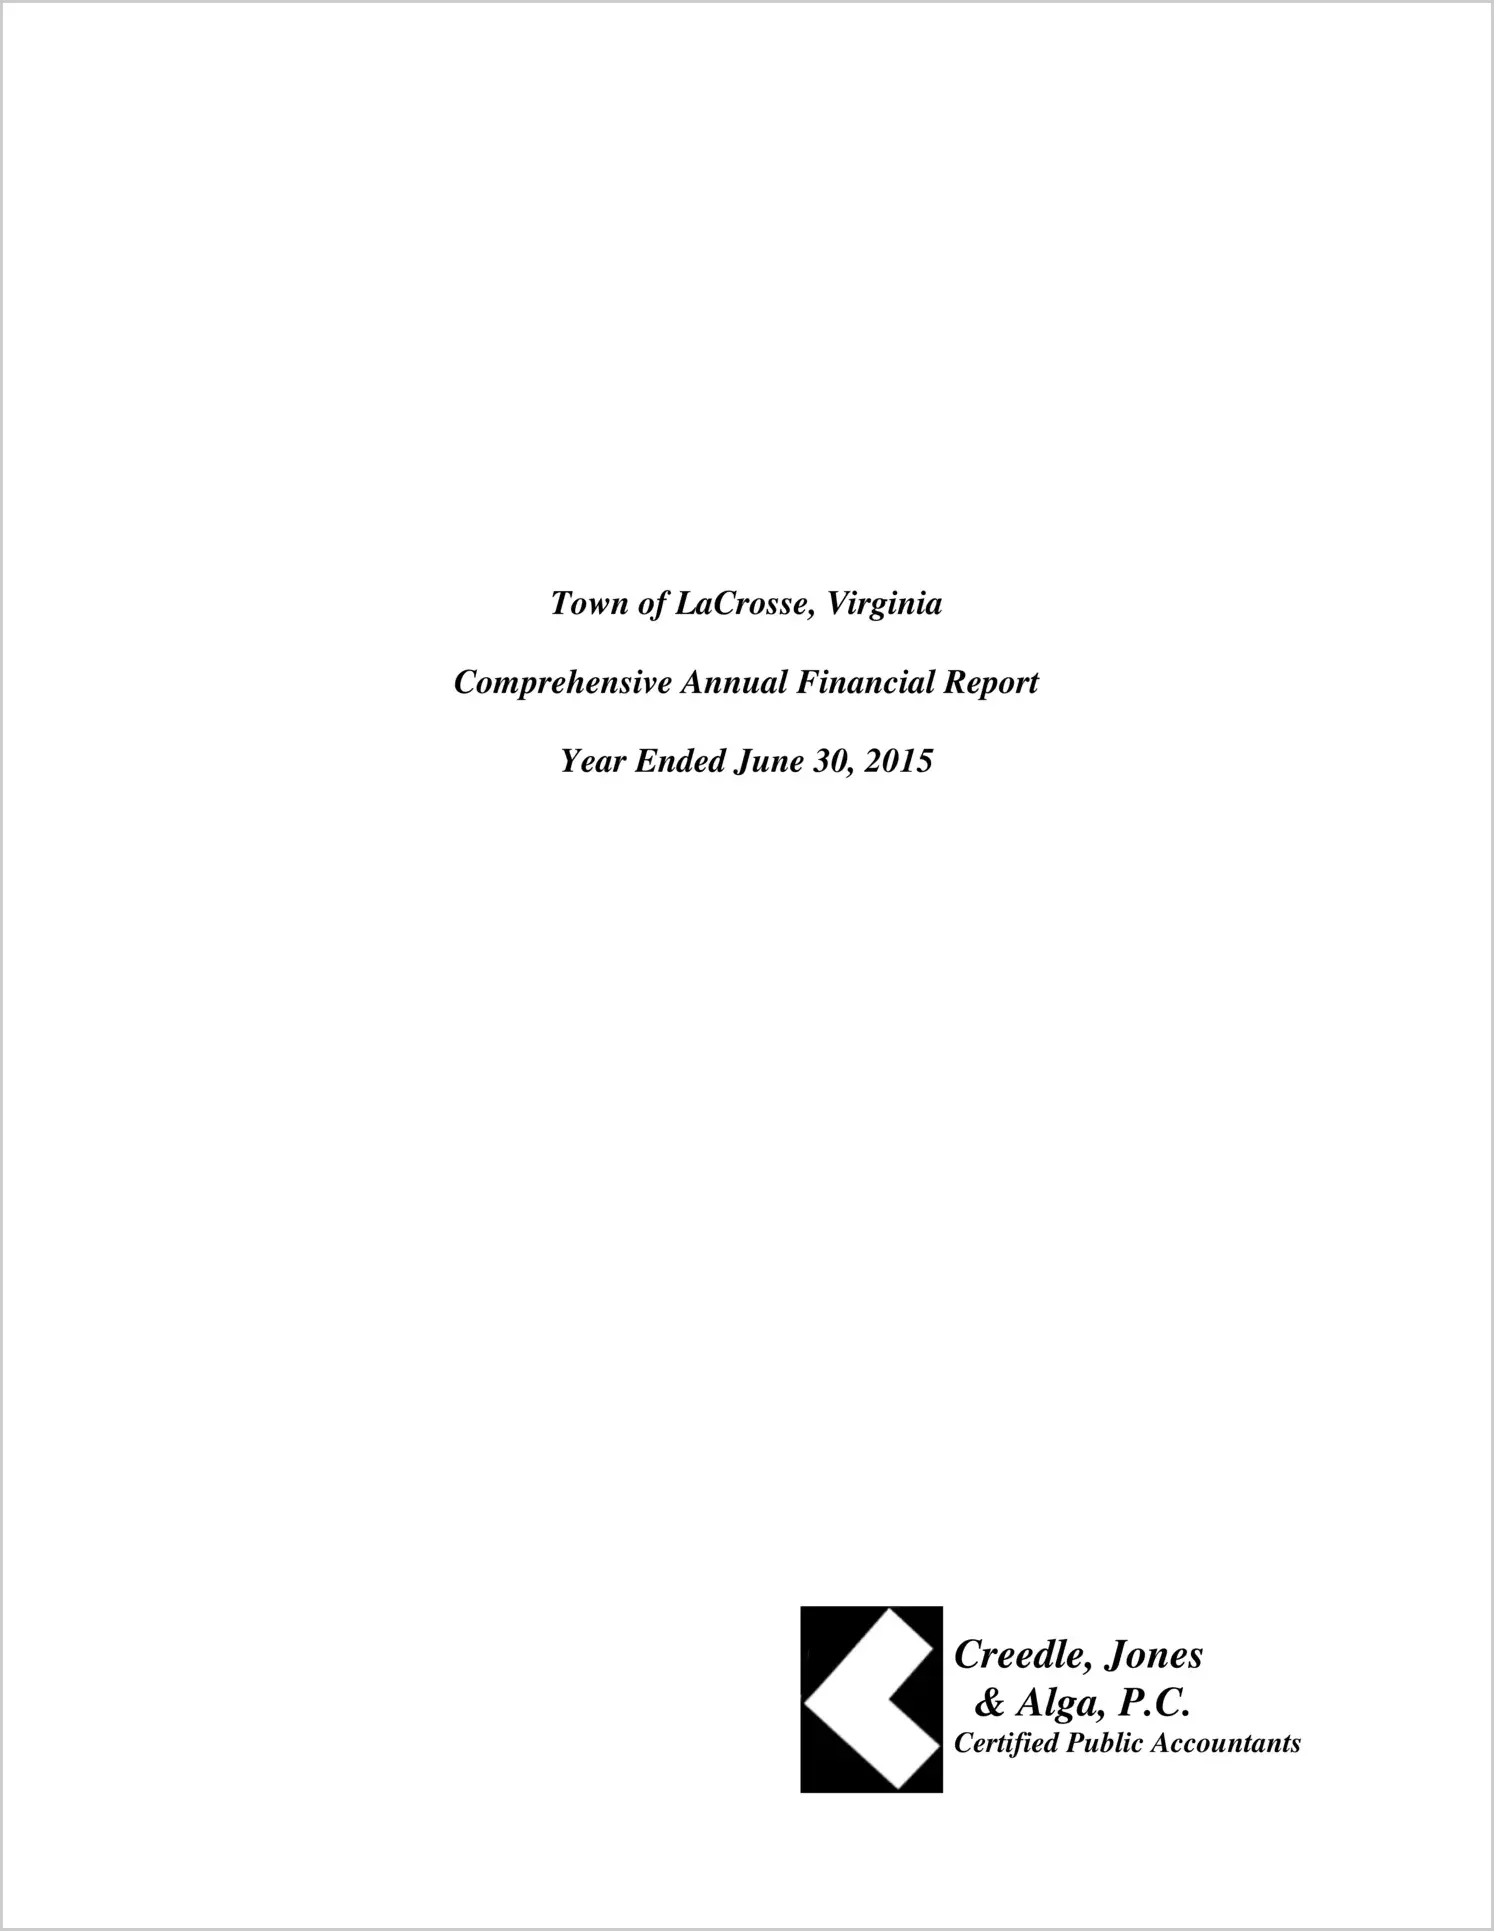 2015 Annual Financial Report for Town of La Crosse